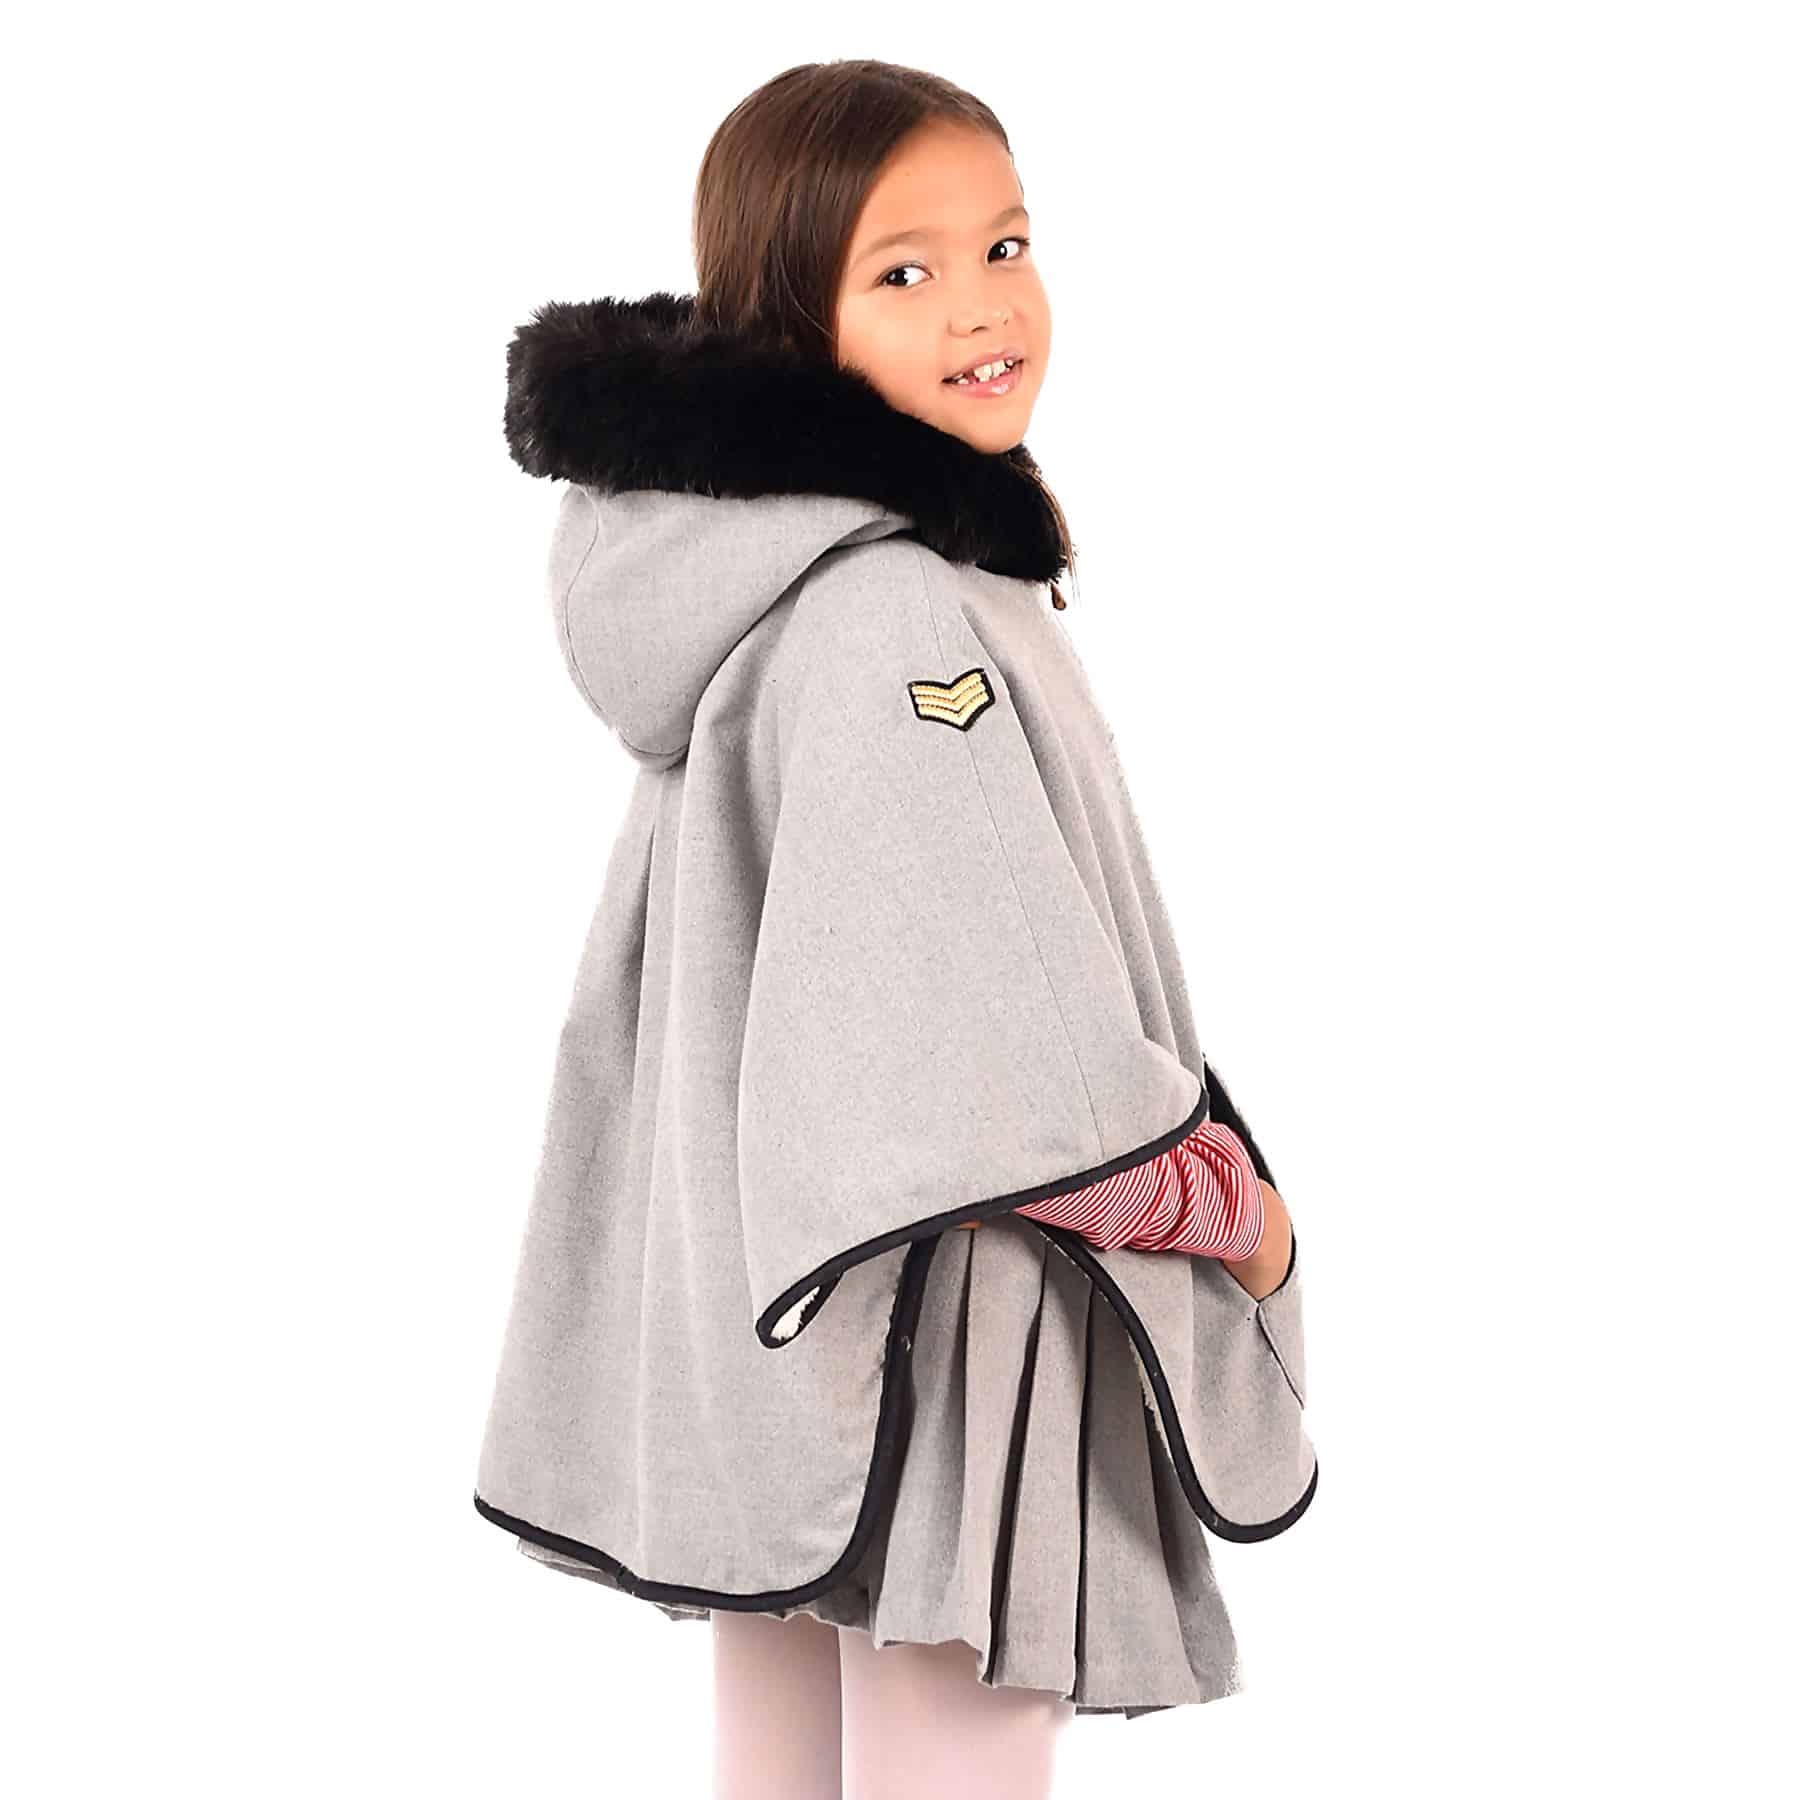 Grey wool coat with large white faux fur hood and white faux fur pockets from children's fashion brand LA FAUTE A VOLTAIRE